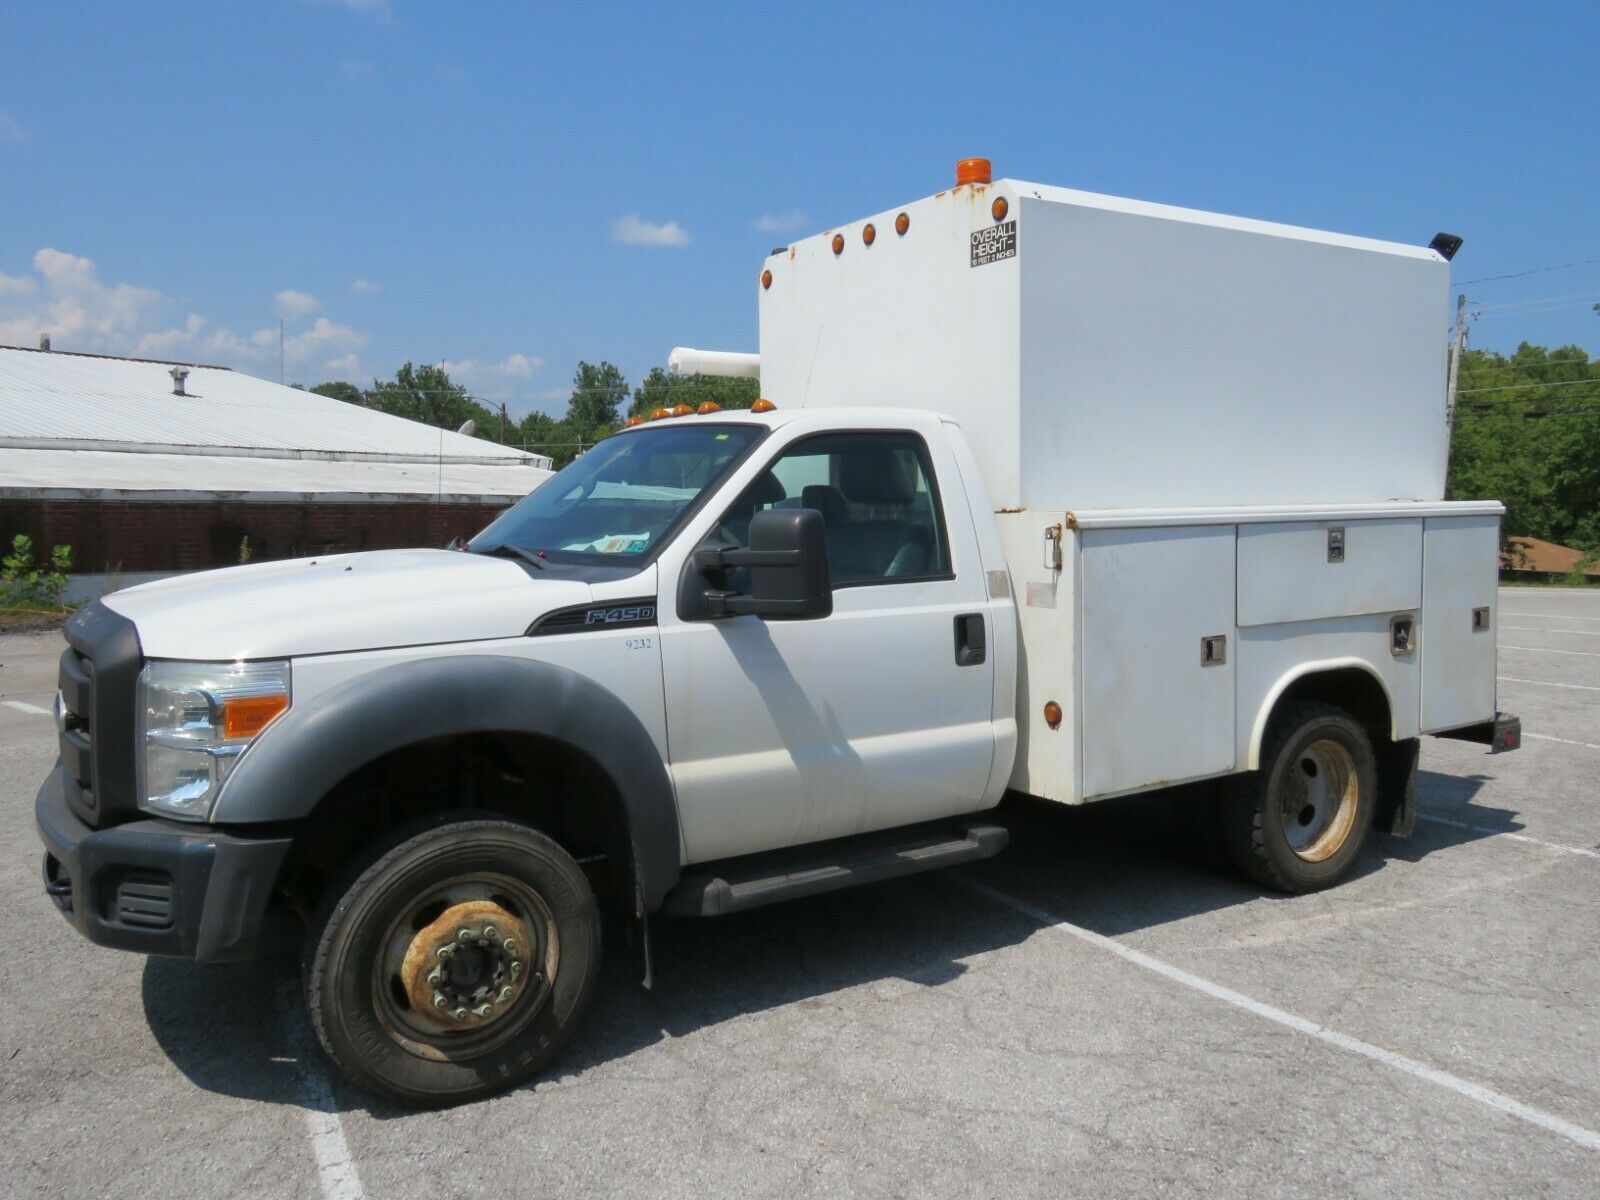 2011 Ford F-450 Single Cab Enclosed Utility Bed 4x4 Dually Reg Cab 4x4 Dually V-10 6.8  Enclosed Utiilty Bed Ready To Work Low Miles 110k